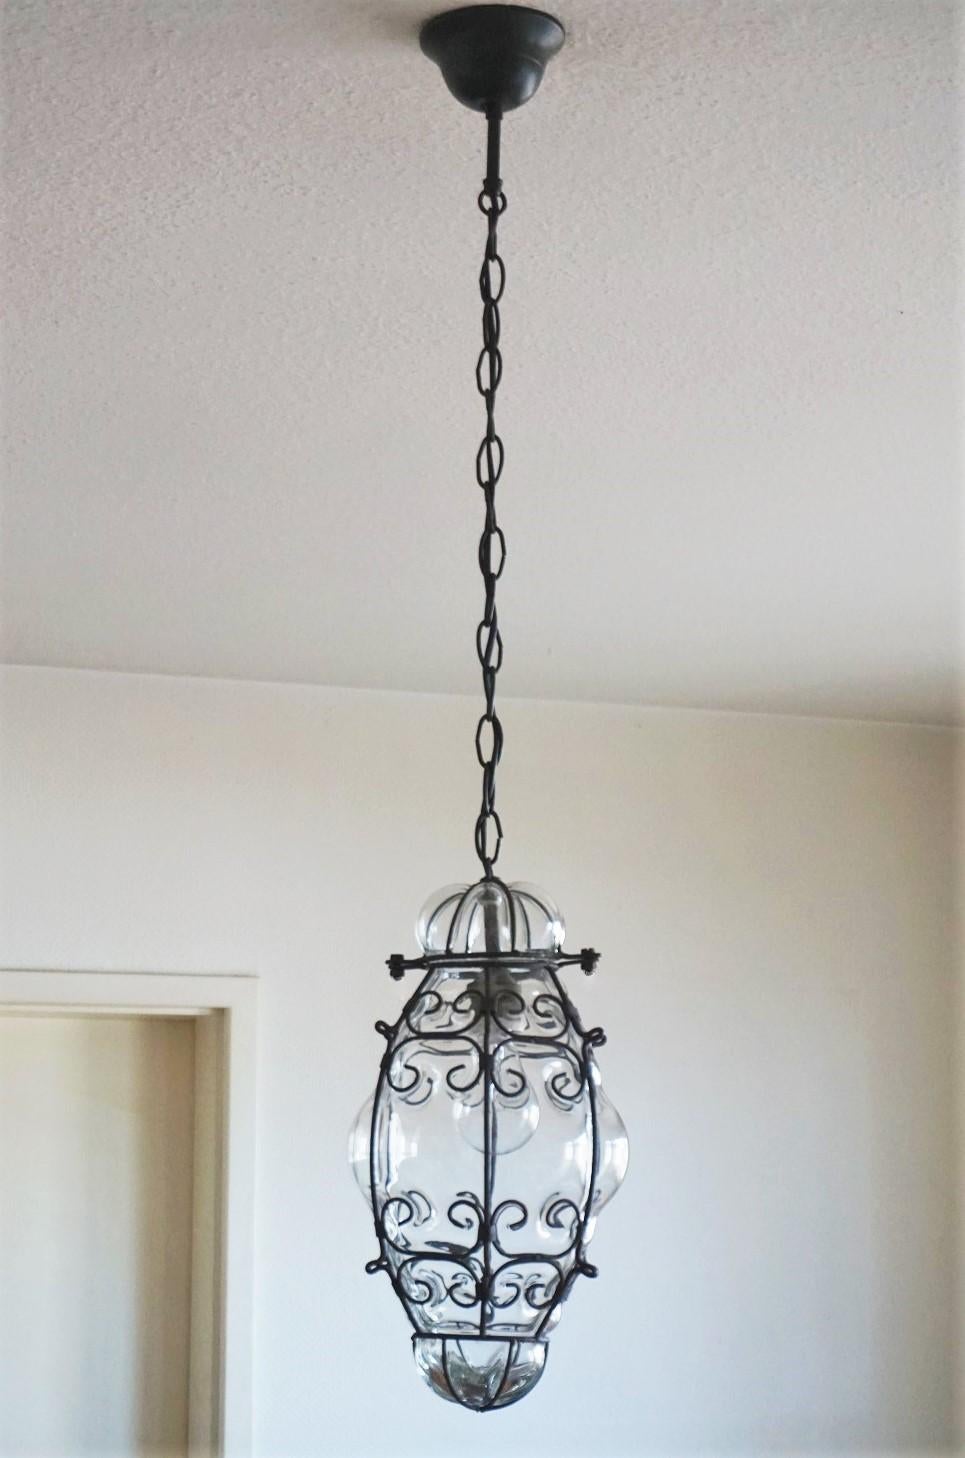 A lovely vintage Venetian hand blown clear glass in wrought iron frame pendant or lantern, Italy, 1930s. This pendant is for indoor and outdoor use.
One E27 light socket for a large sized bulb up to 100W.
Measures:
Total height 39